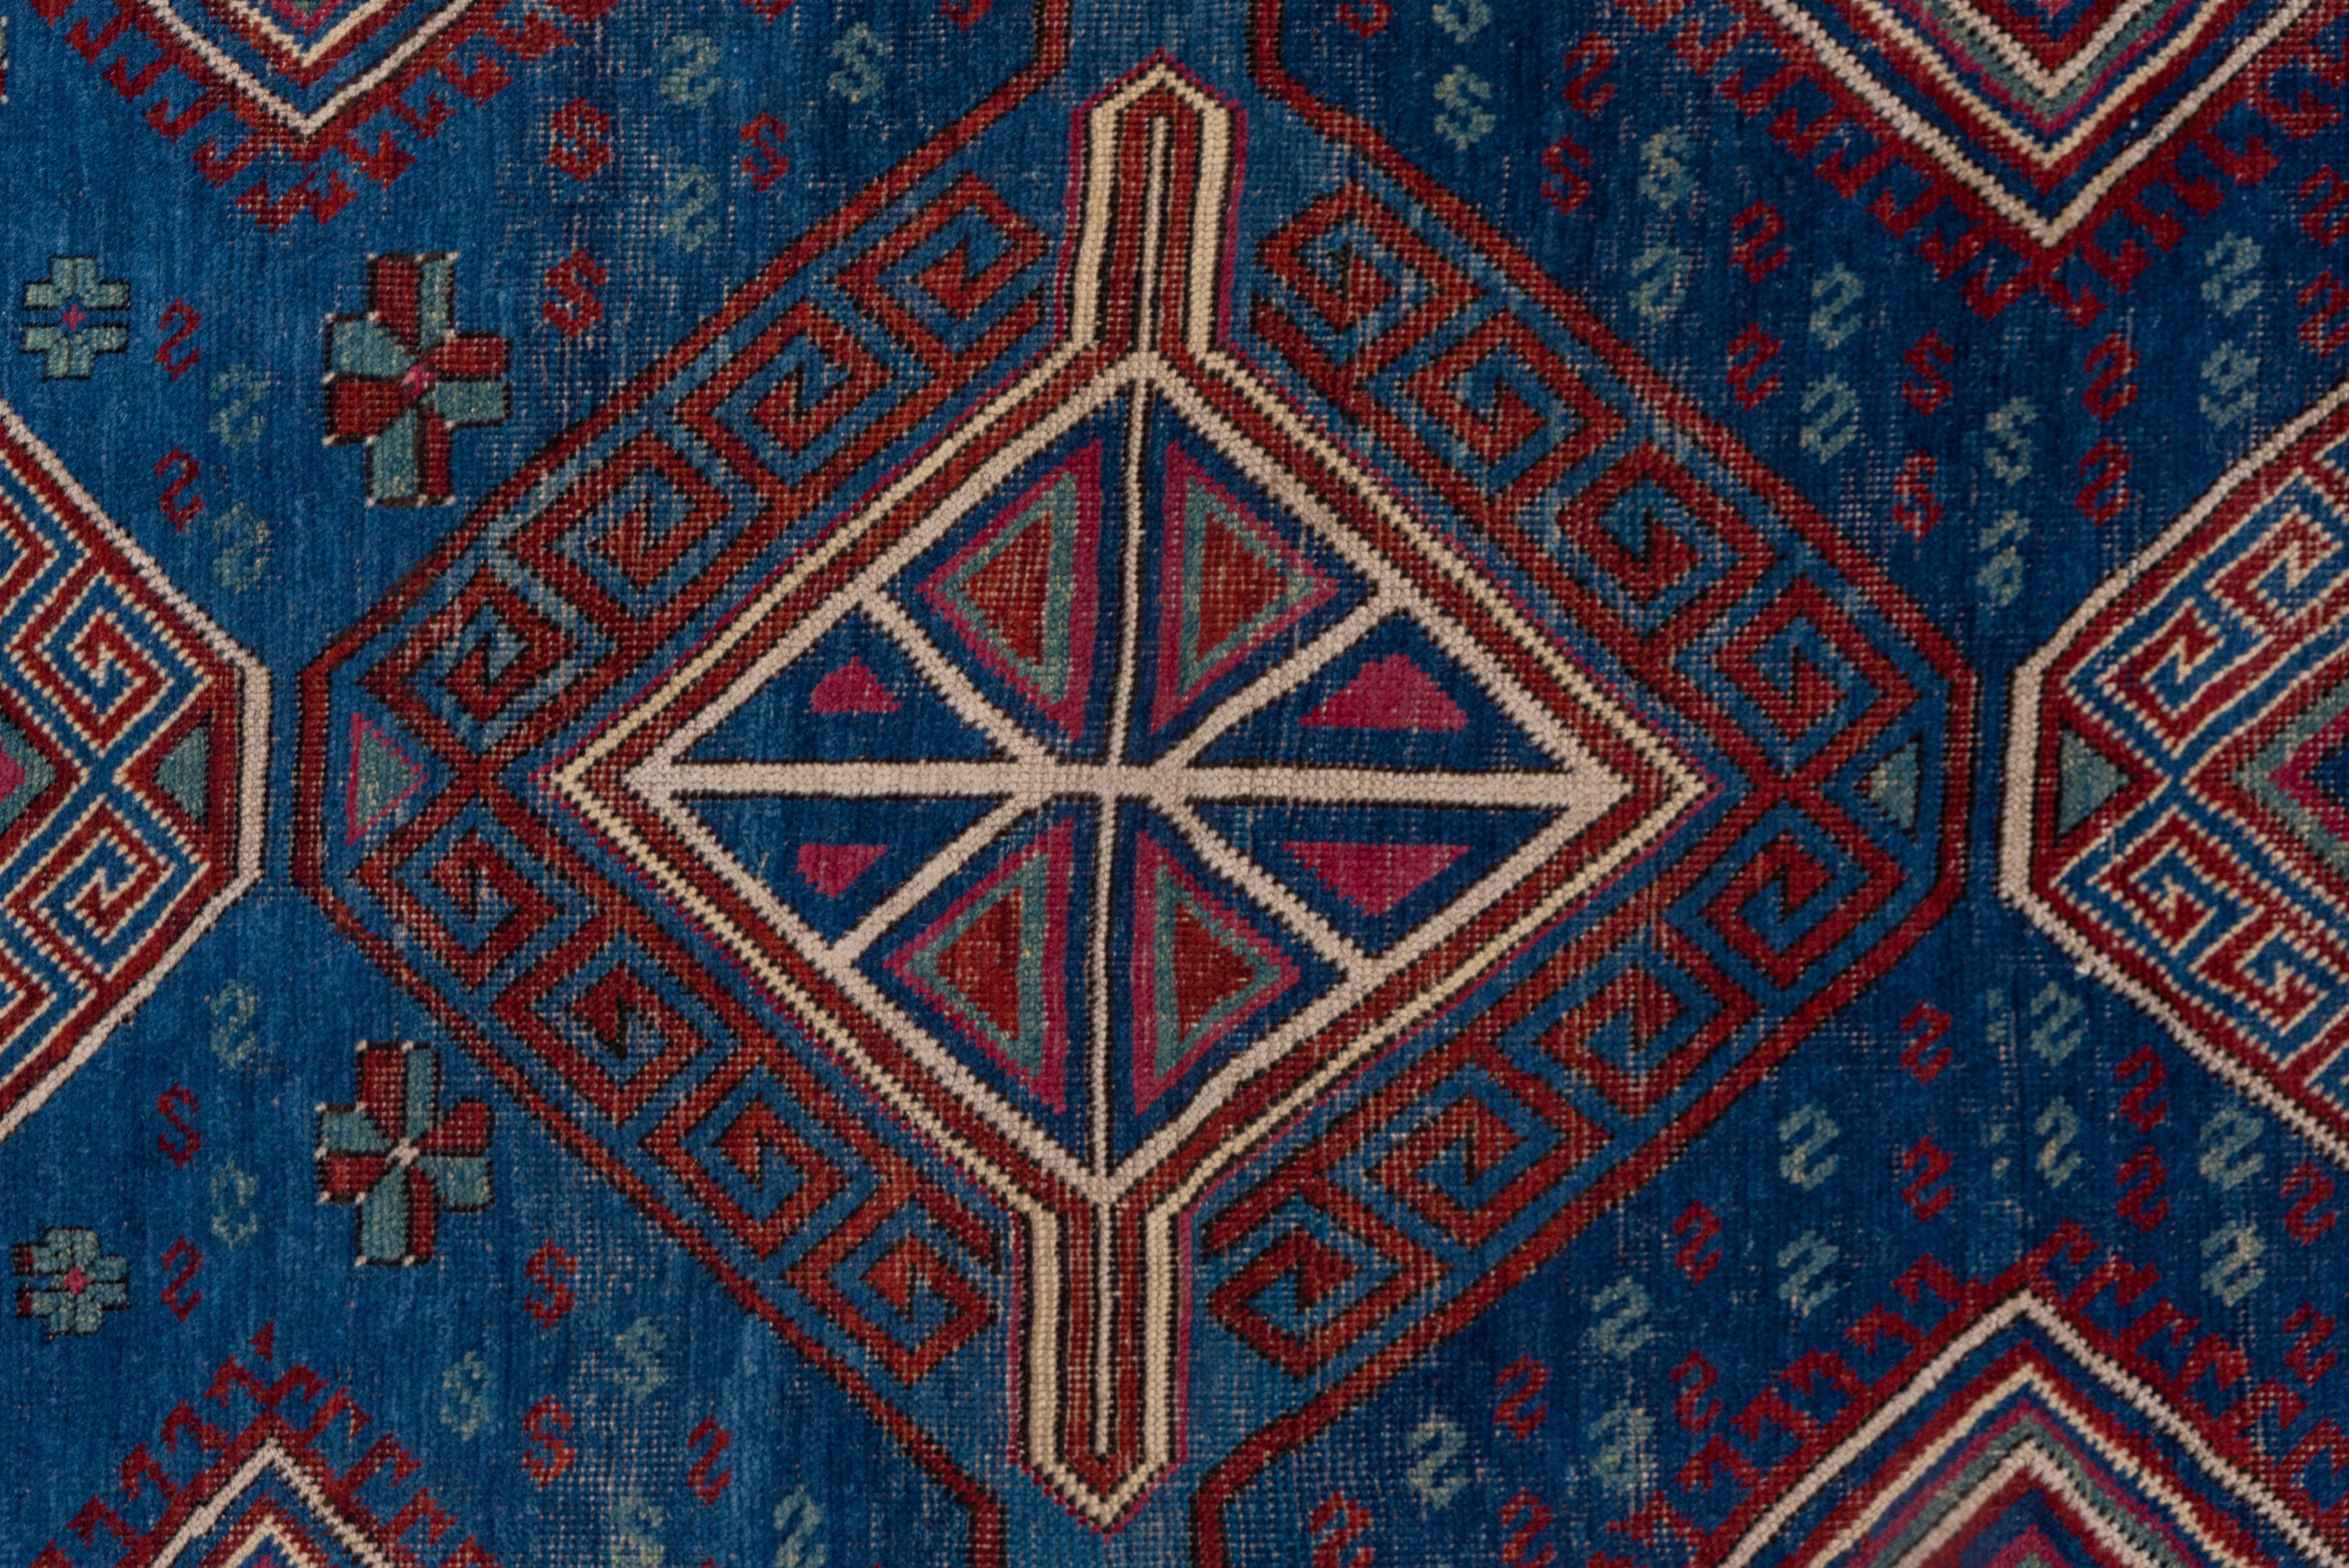 Tribal Antique Caucasian Kuba Area Rug, Dark Blue Field, Red Borders, Pink Accents For Sale